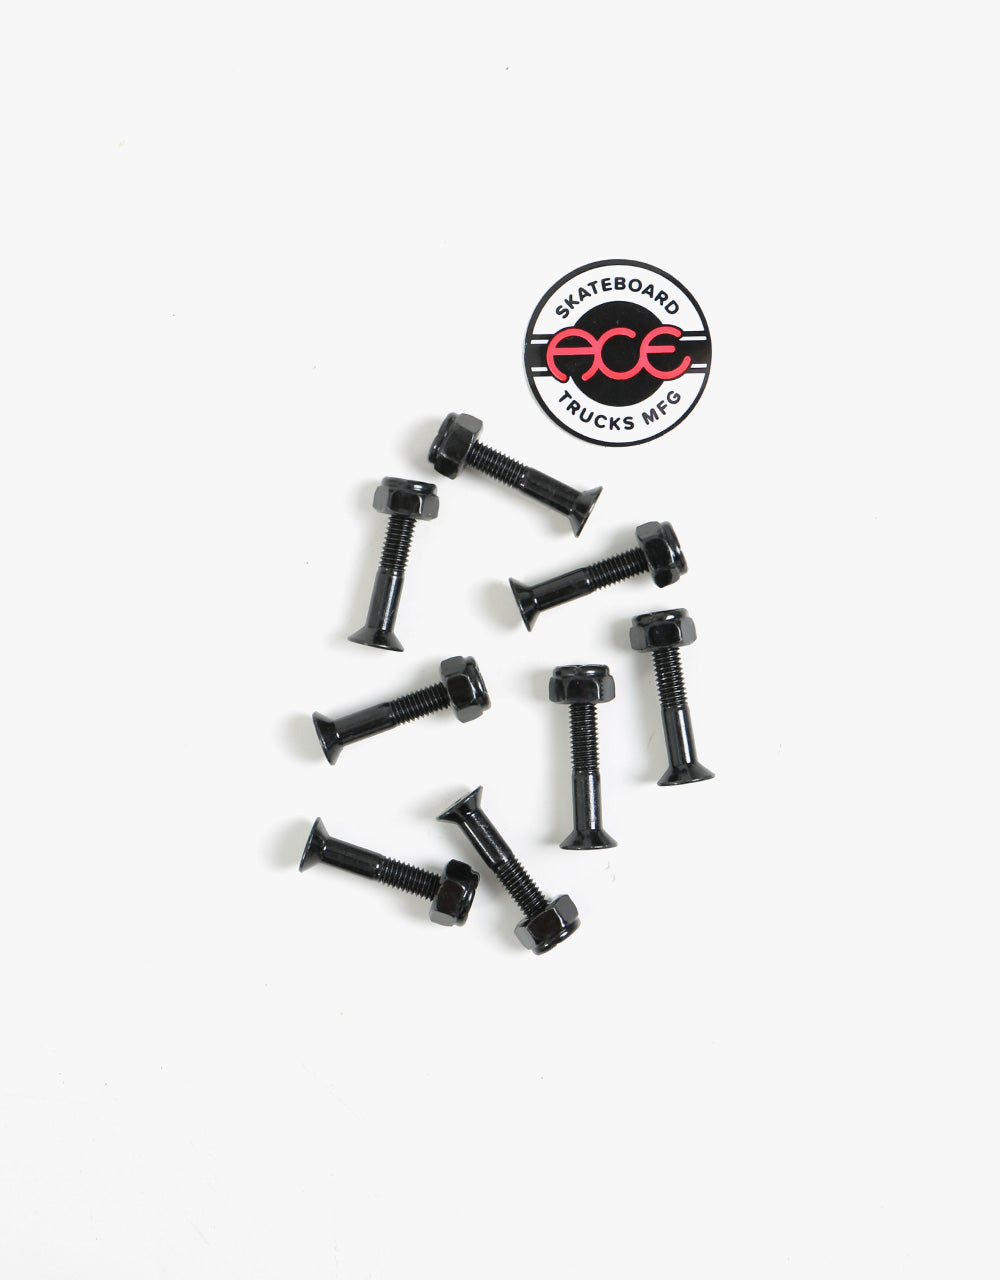 Ace 1" Phillips Bolts